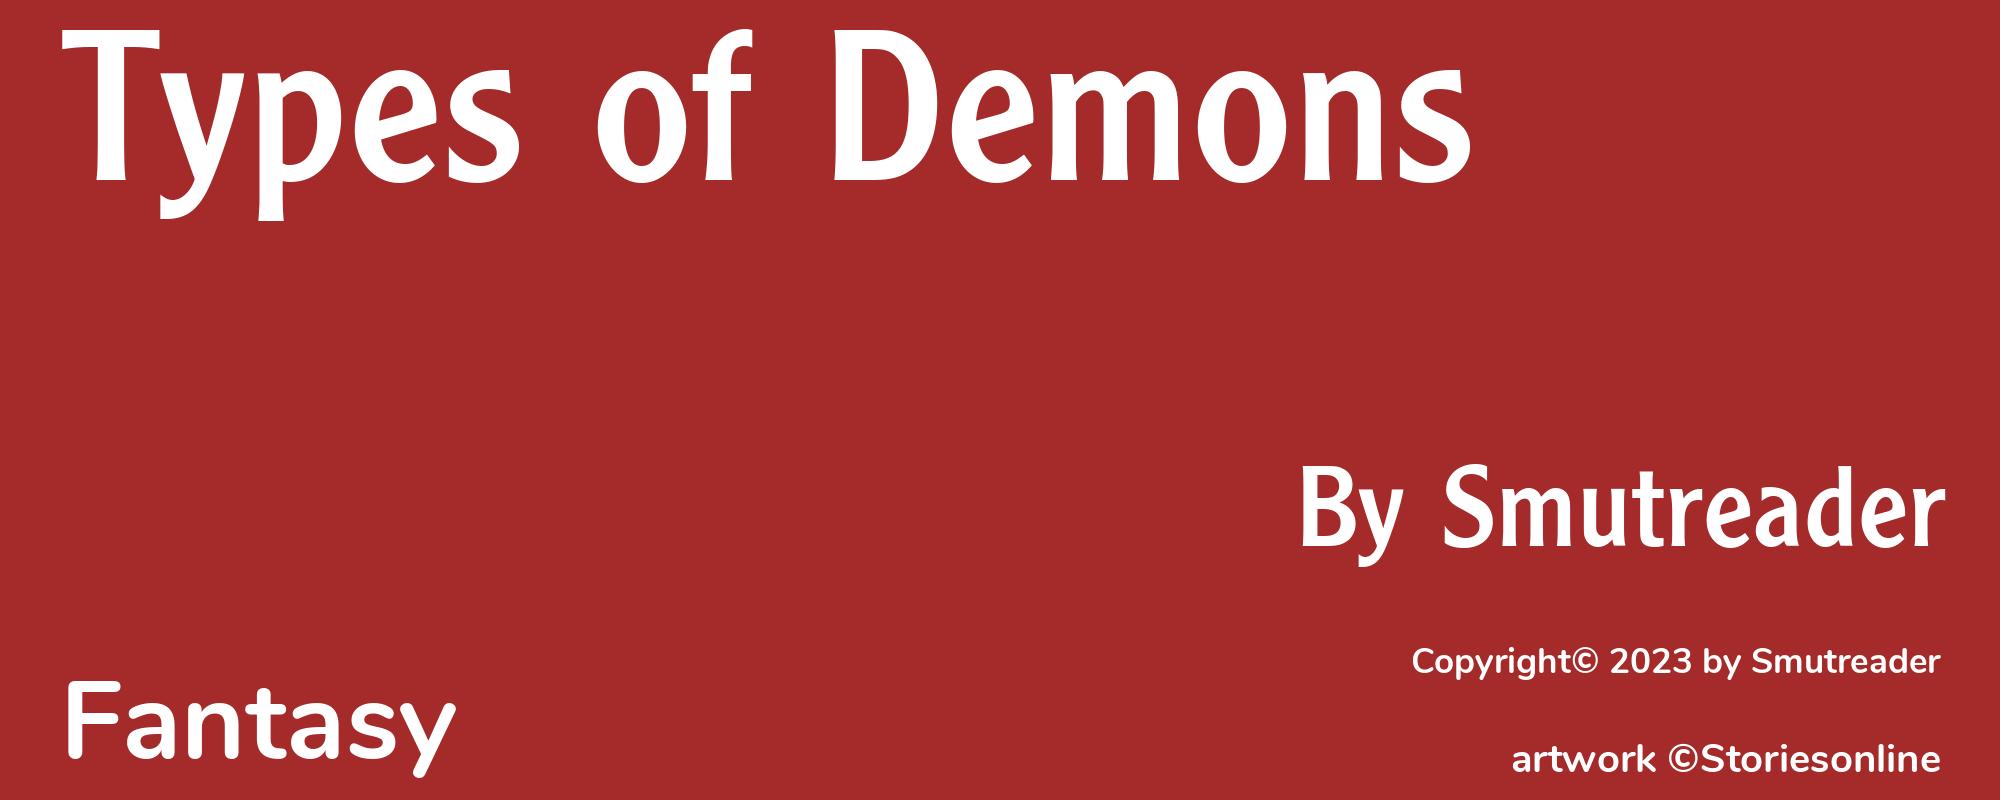 Types of Demons - Cover